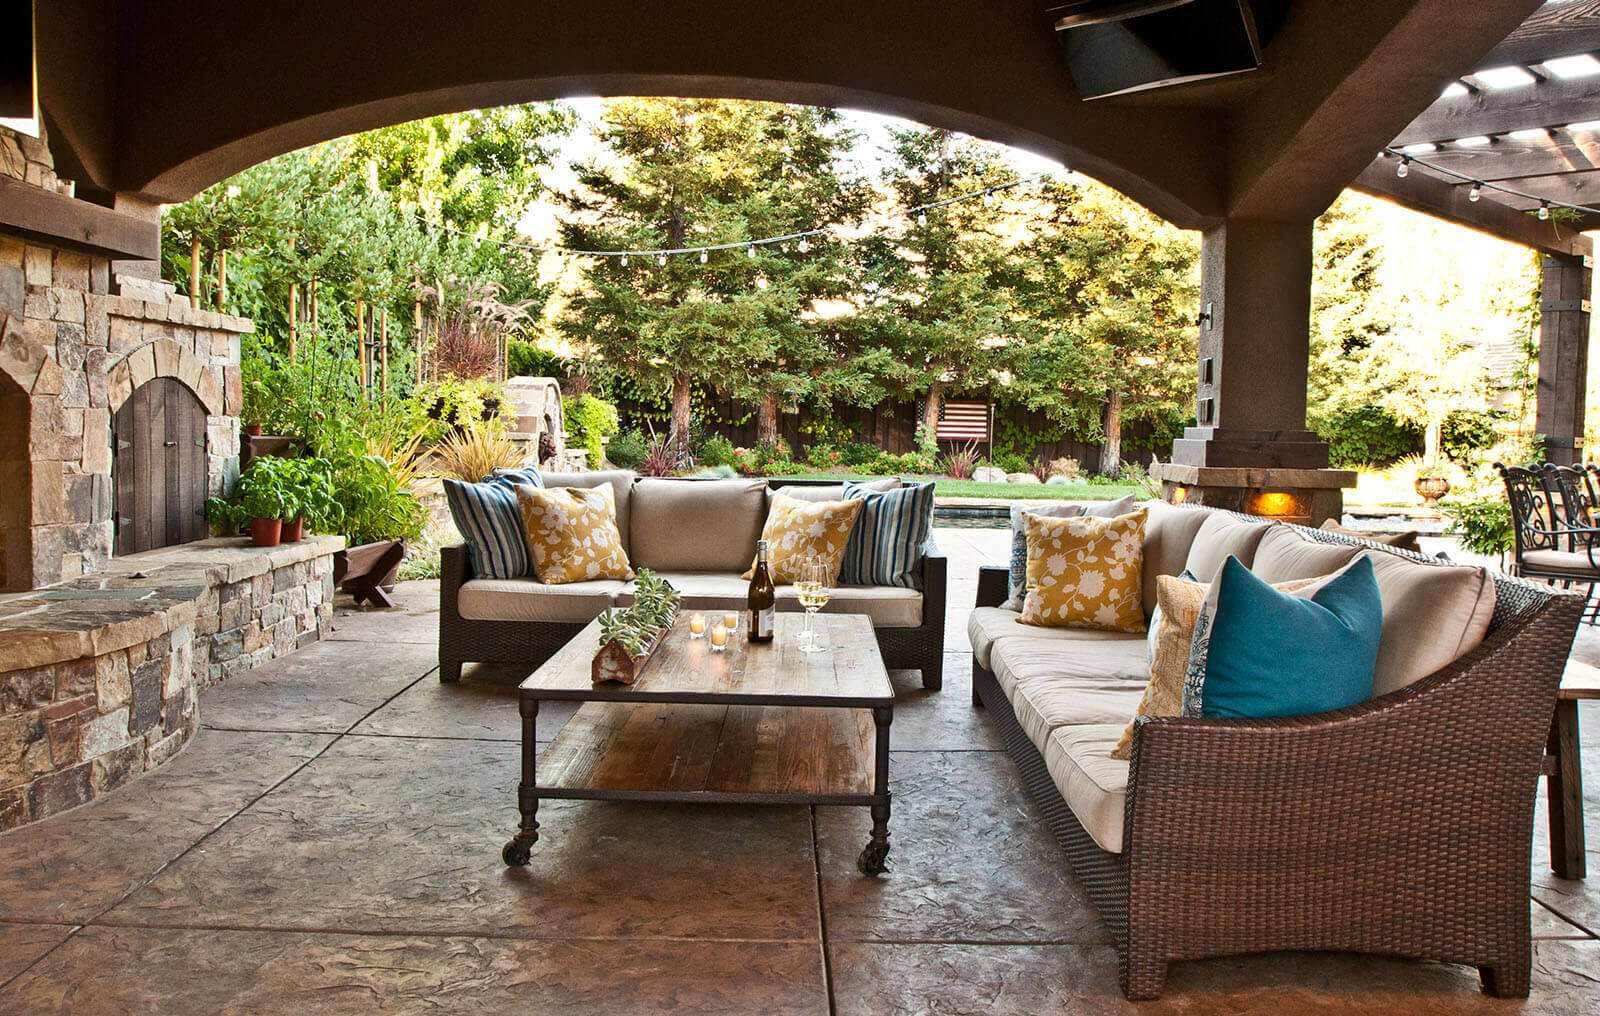 Covered outdoor lounge with rustic tile in secluded tree-lined yard